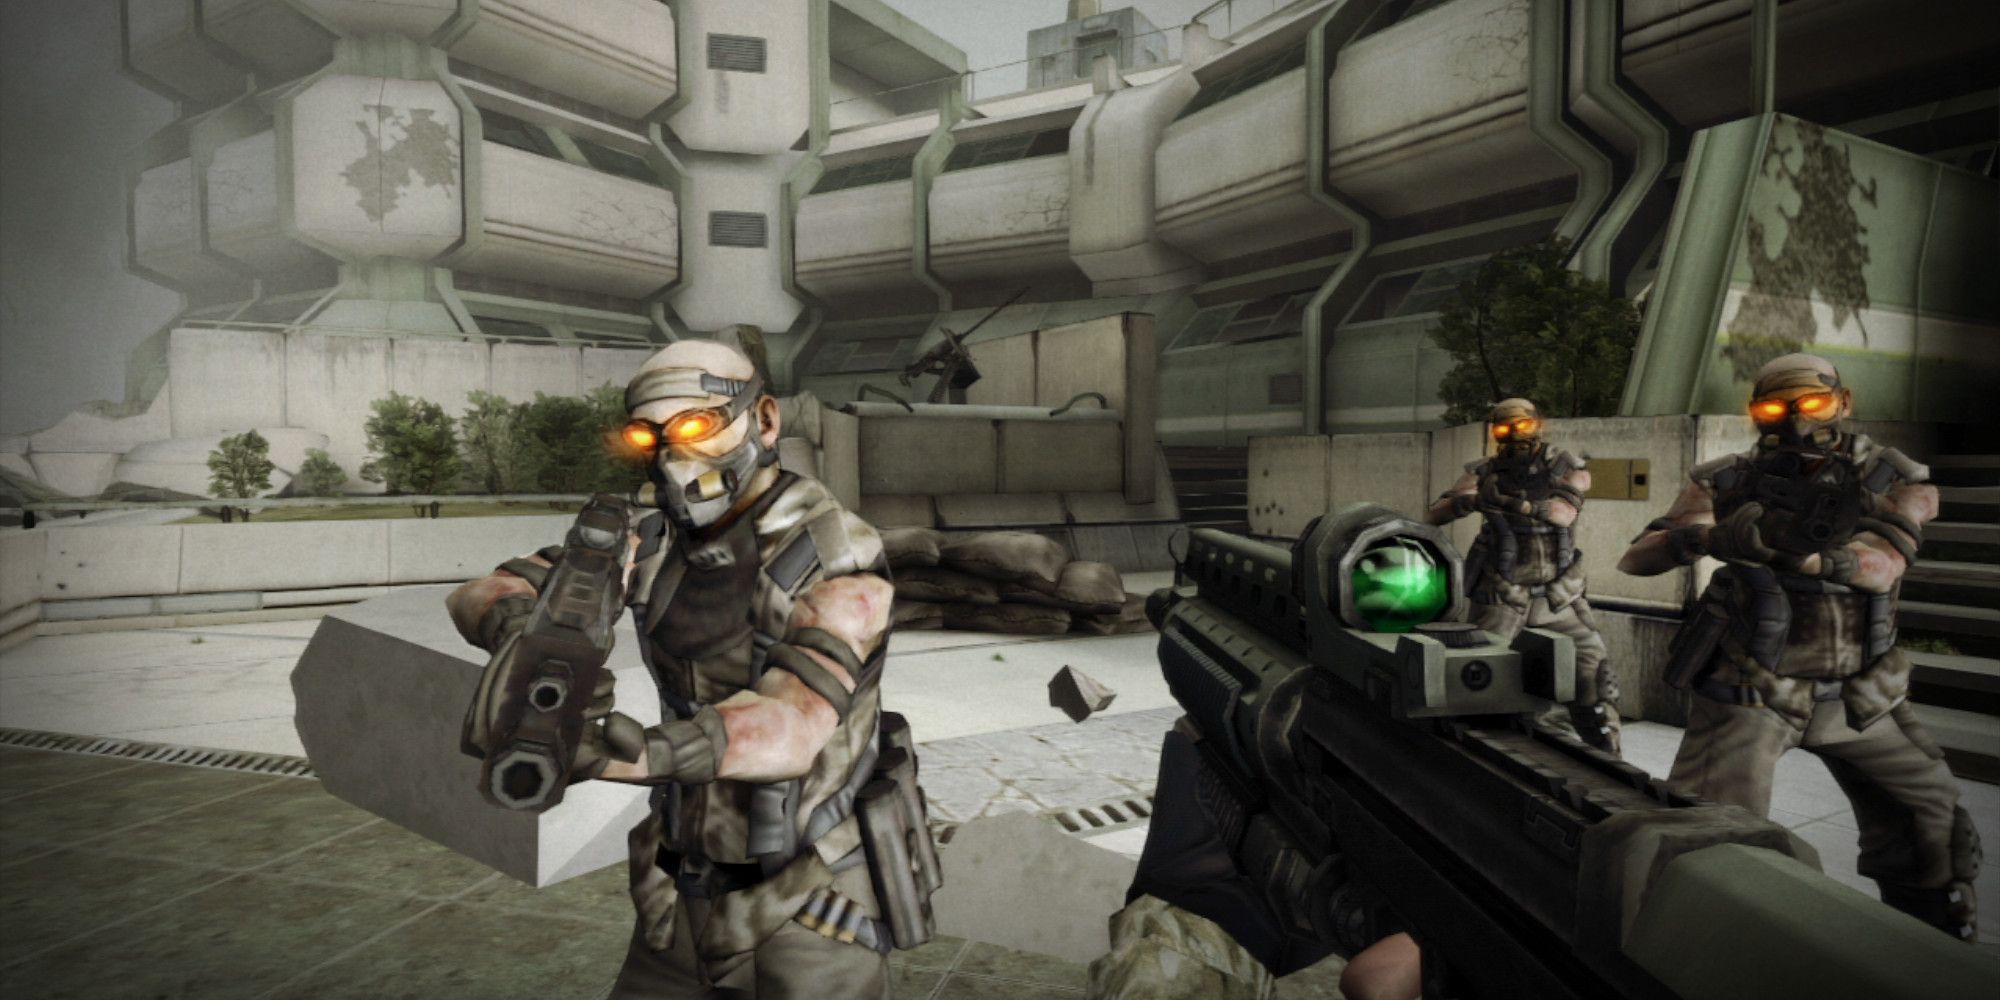 player aims assault rifle at enemies